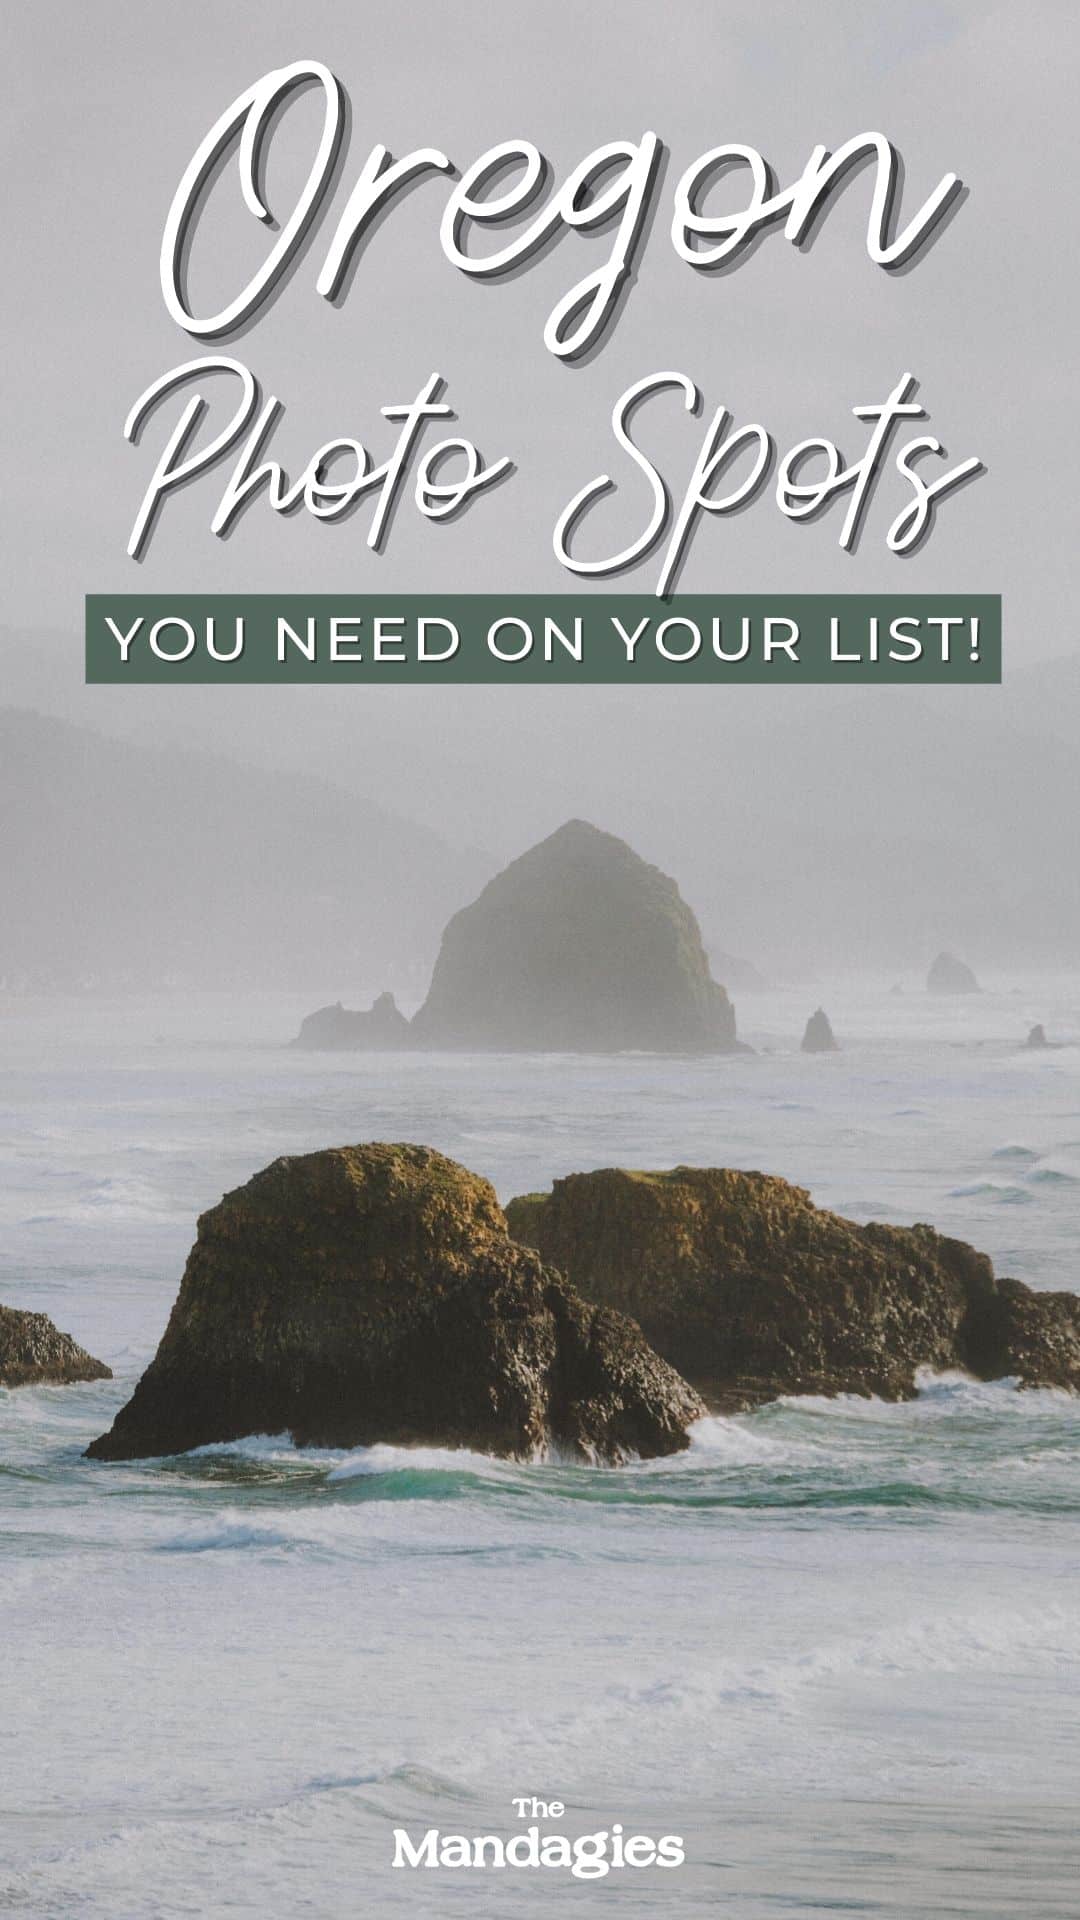 Looking for the best places to visit in Oregon? In this post, we're sharing Oregon's coolest photography locations, including iconic spots like Cannon Beach and Samuel H Boardman, but also secret hot springs, remote waterfalls, and more! Save this post for your next trip to Oregon! #Oregon #Oregoncoast #WestUSA #PNW #roadtripUSA #USAroadtrip #roadtrip #pacificNorthwest #multnomahfalls #cannonbeach #mountahood #cascademountains #portland #eugene